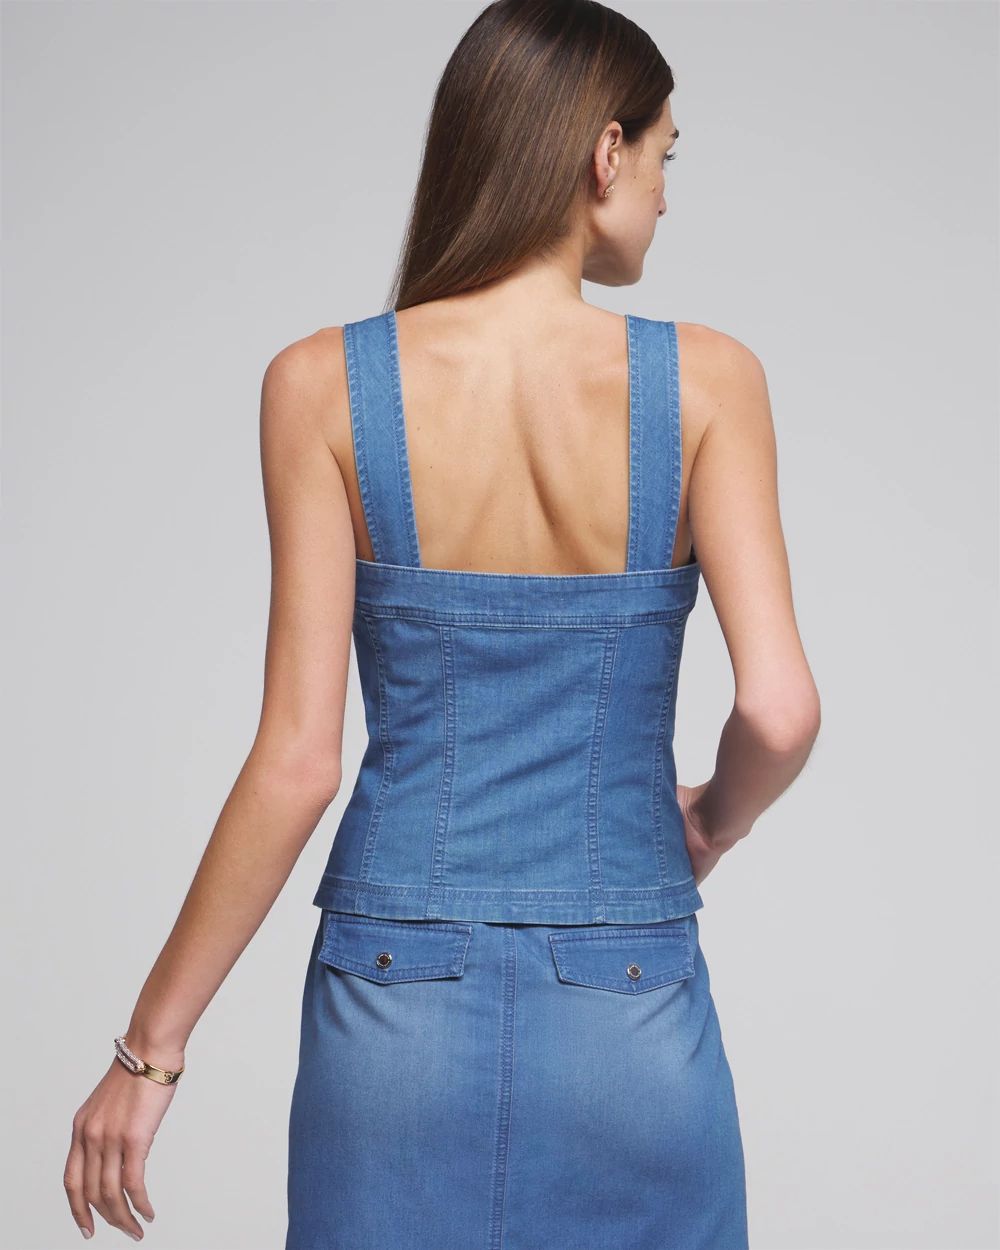 Outlet WHBM Sleeveless Denim Bustier click to view larger image.